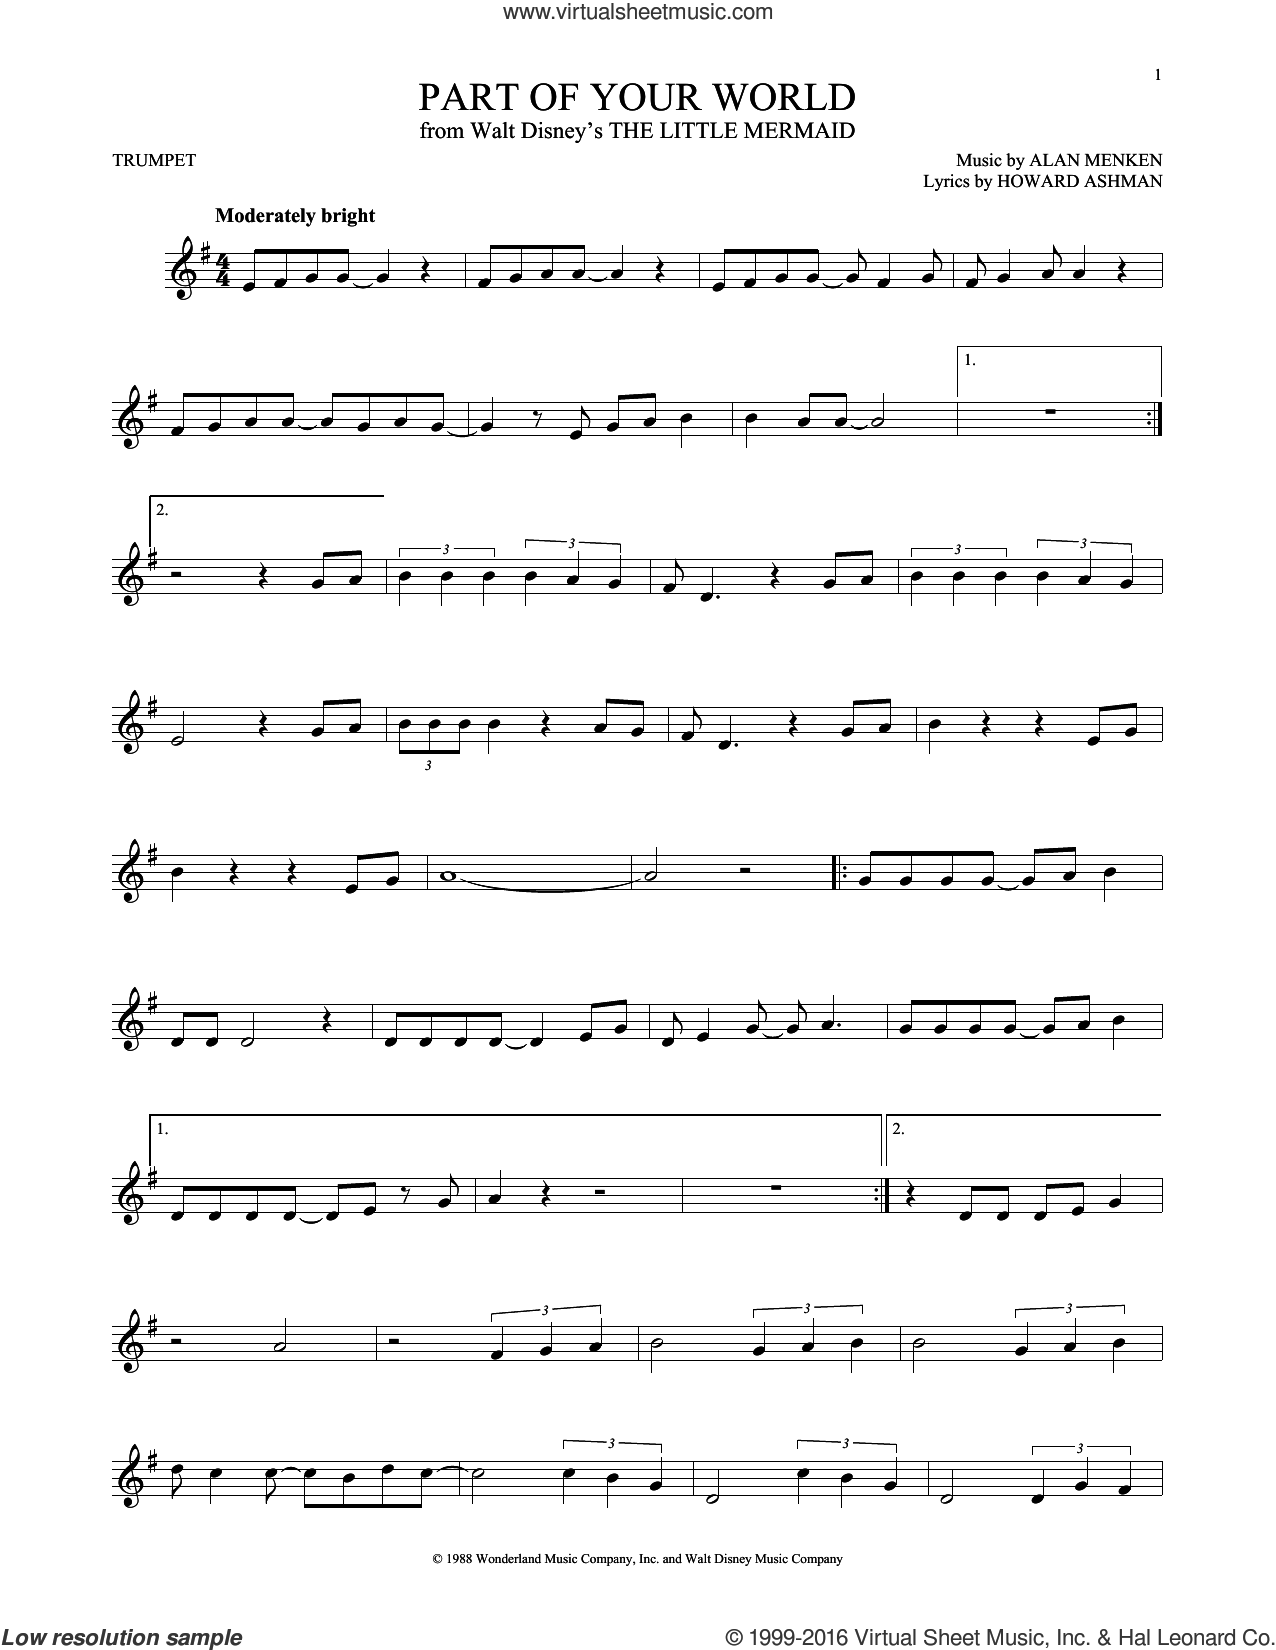 Part Of Your World (from The Little Mermaid) sheet music for trumpet solo